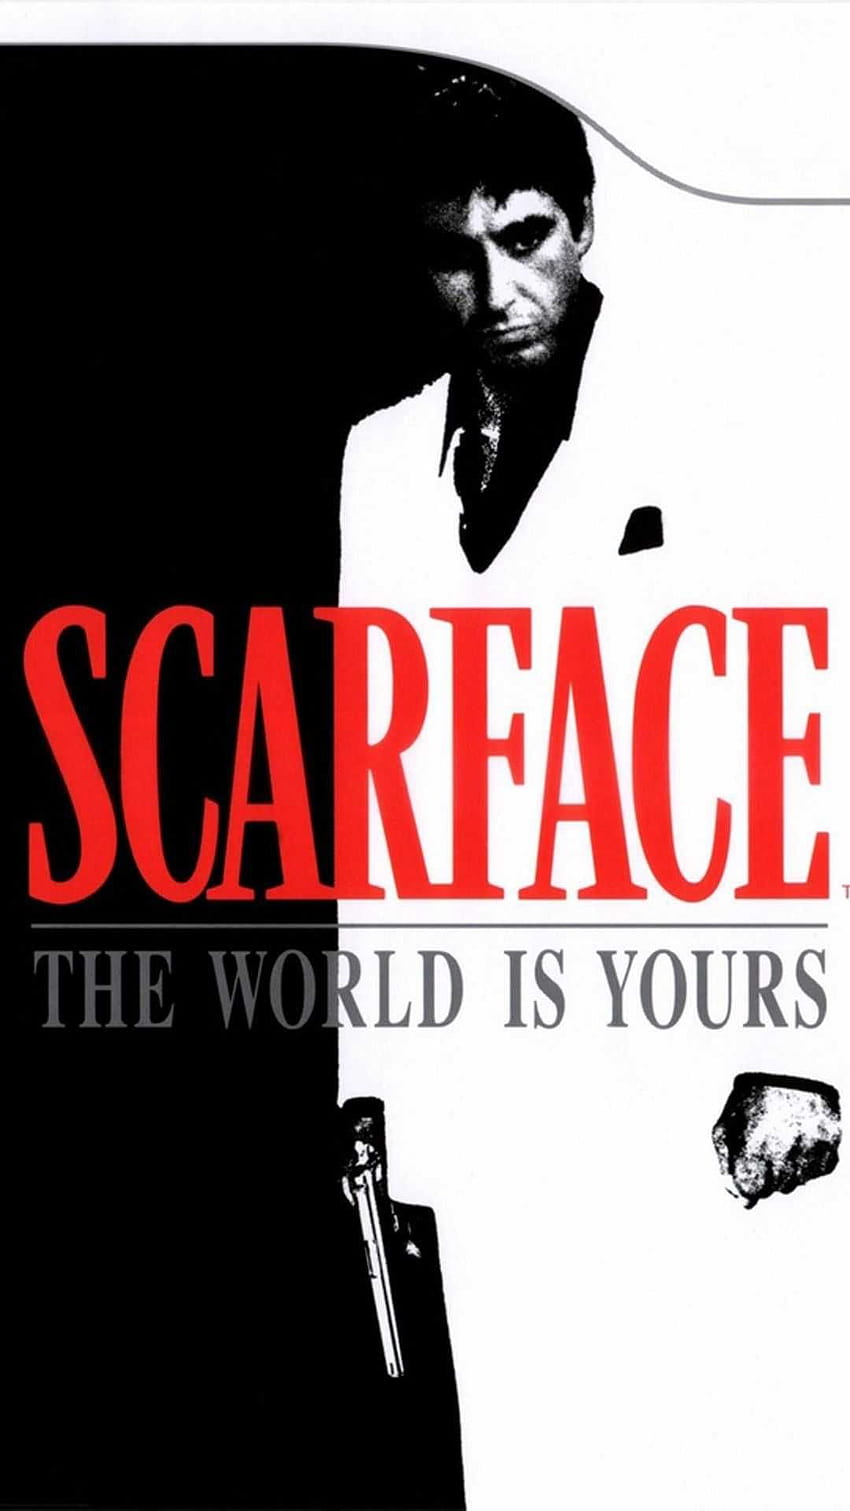 Scarface Discover more Al Pacino, Film, Scarface, Tony Montana . https://www.ixpap/scarface… in 2022, scarface iphone 11 HD phone wallpaper